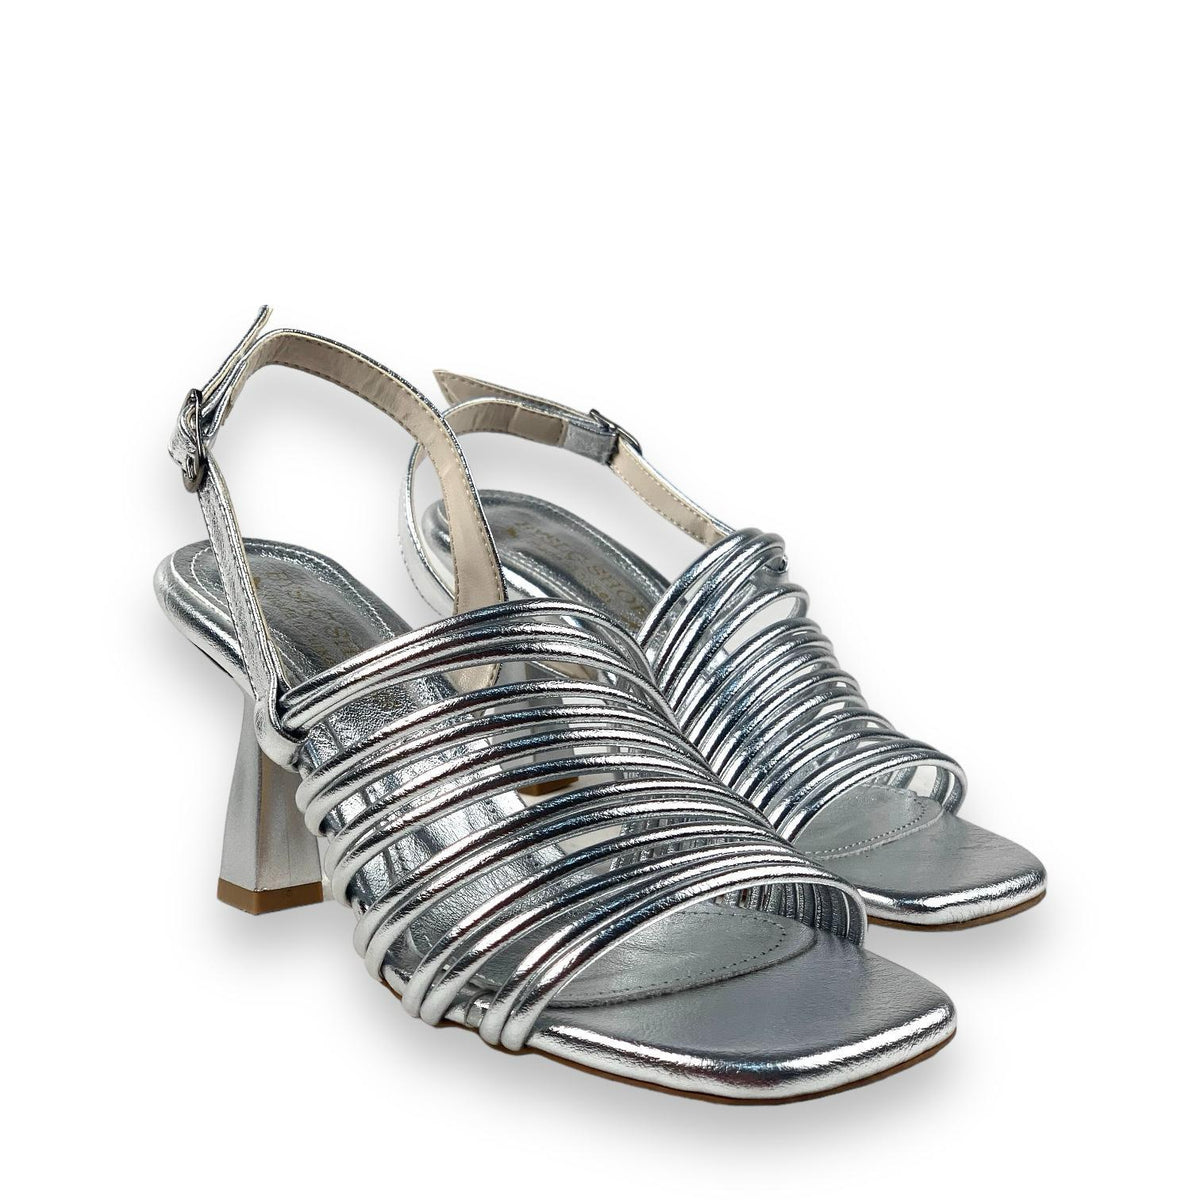 Women's Calç Silver Heeled Ankle Strap Sandals 8 Cm - STREETMODE™